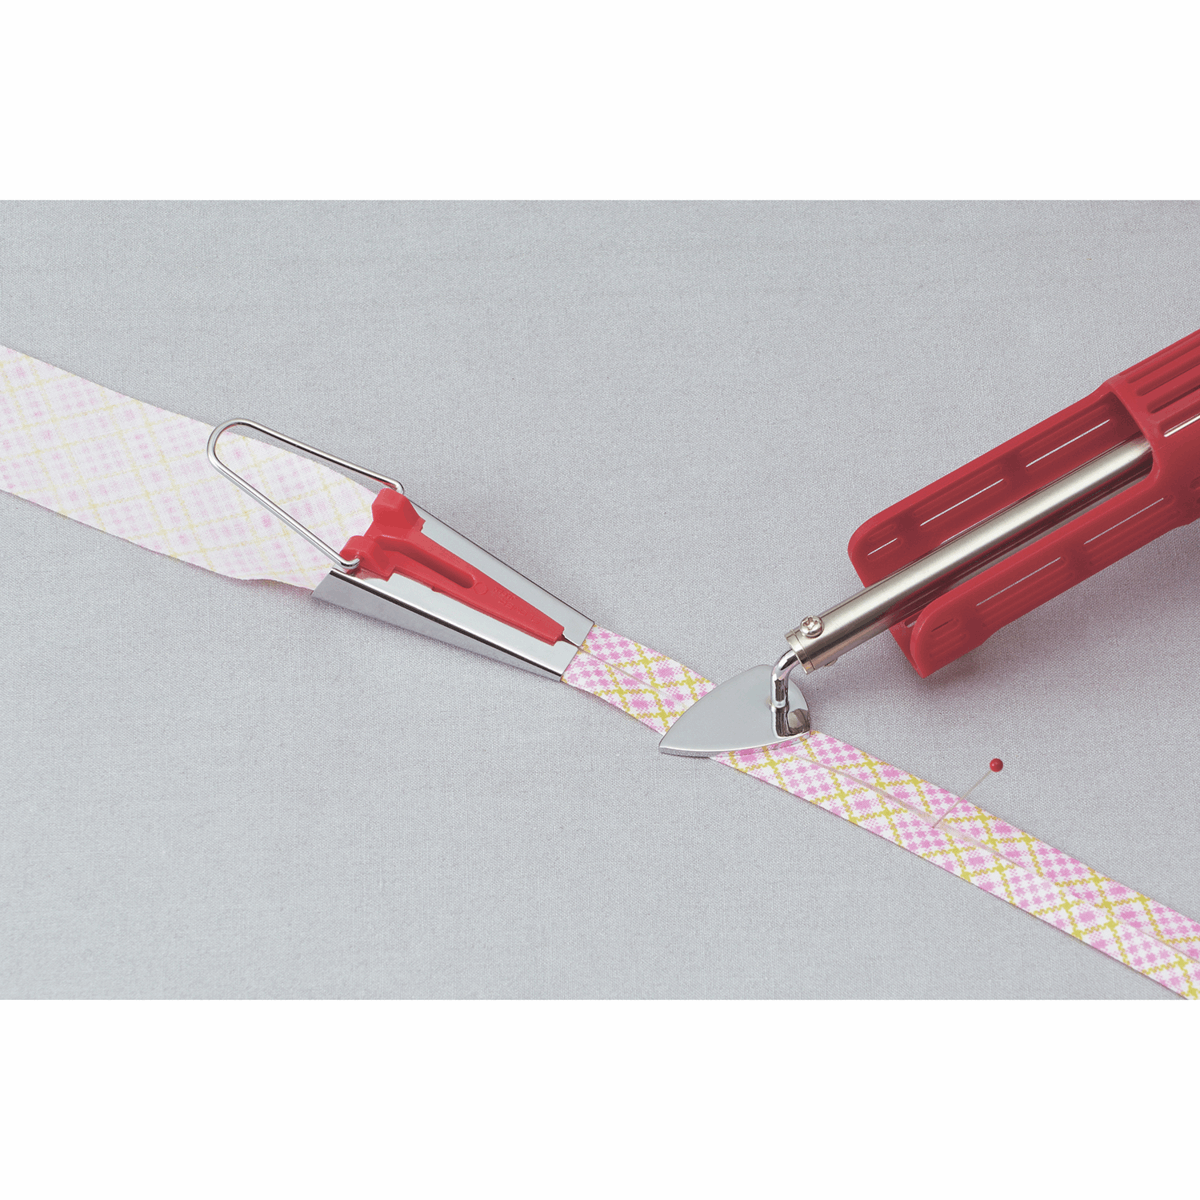 Clover Bias Binding Makers from Jaycotts Sewing Supplies